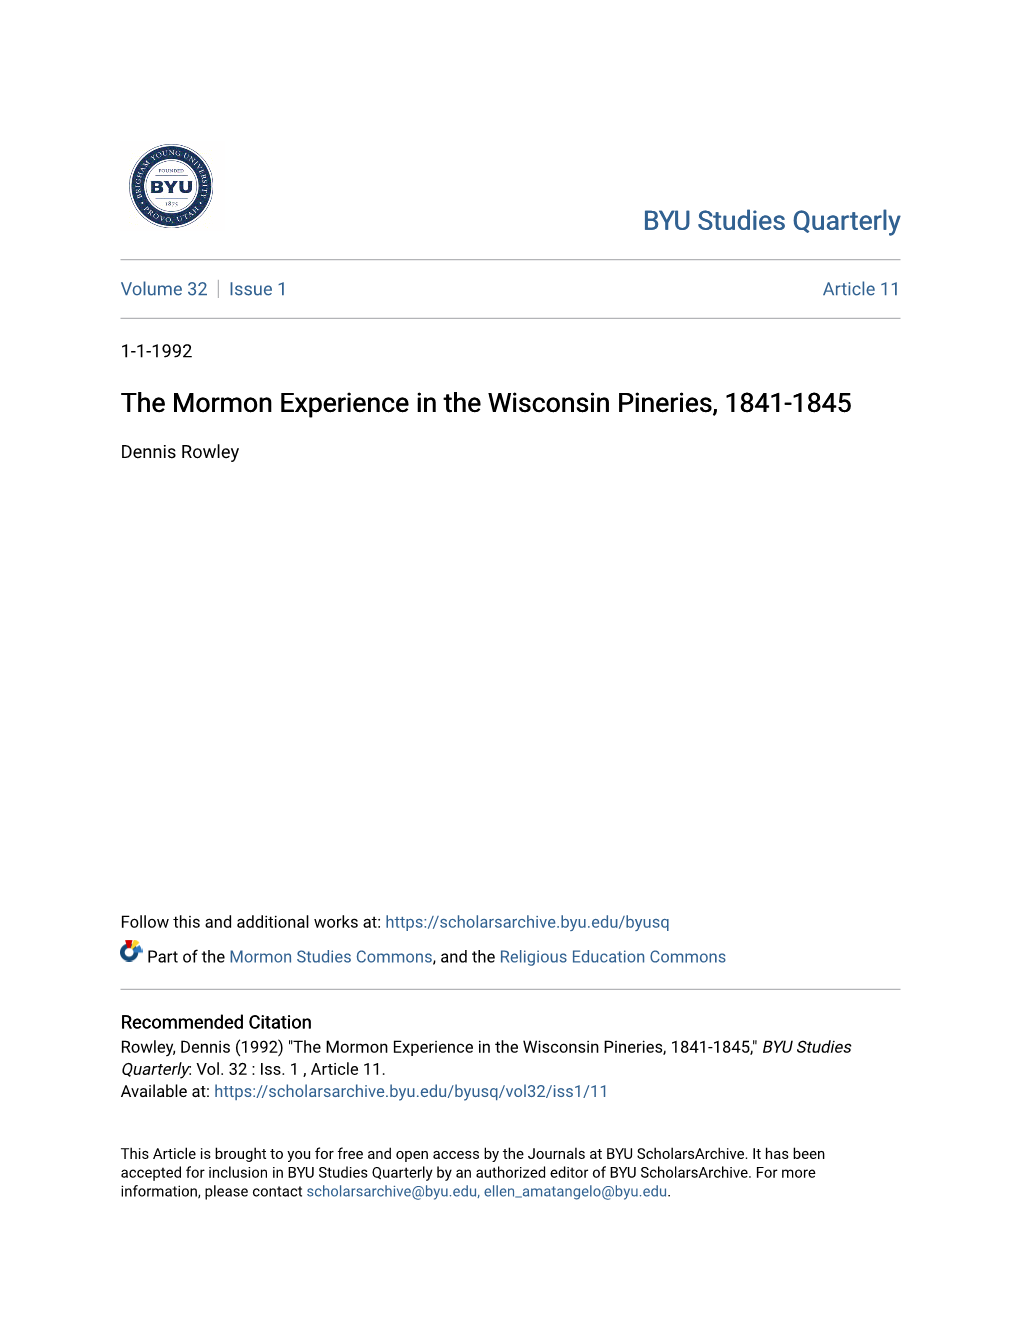 The Mormon Experience in the Wisconsin Pineries, 1841-1845